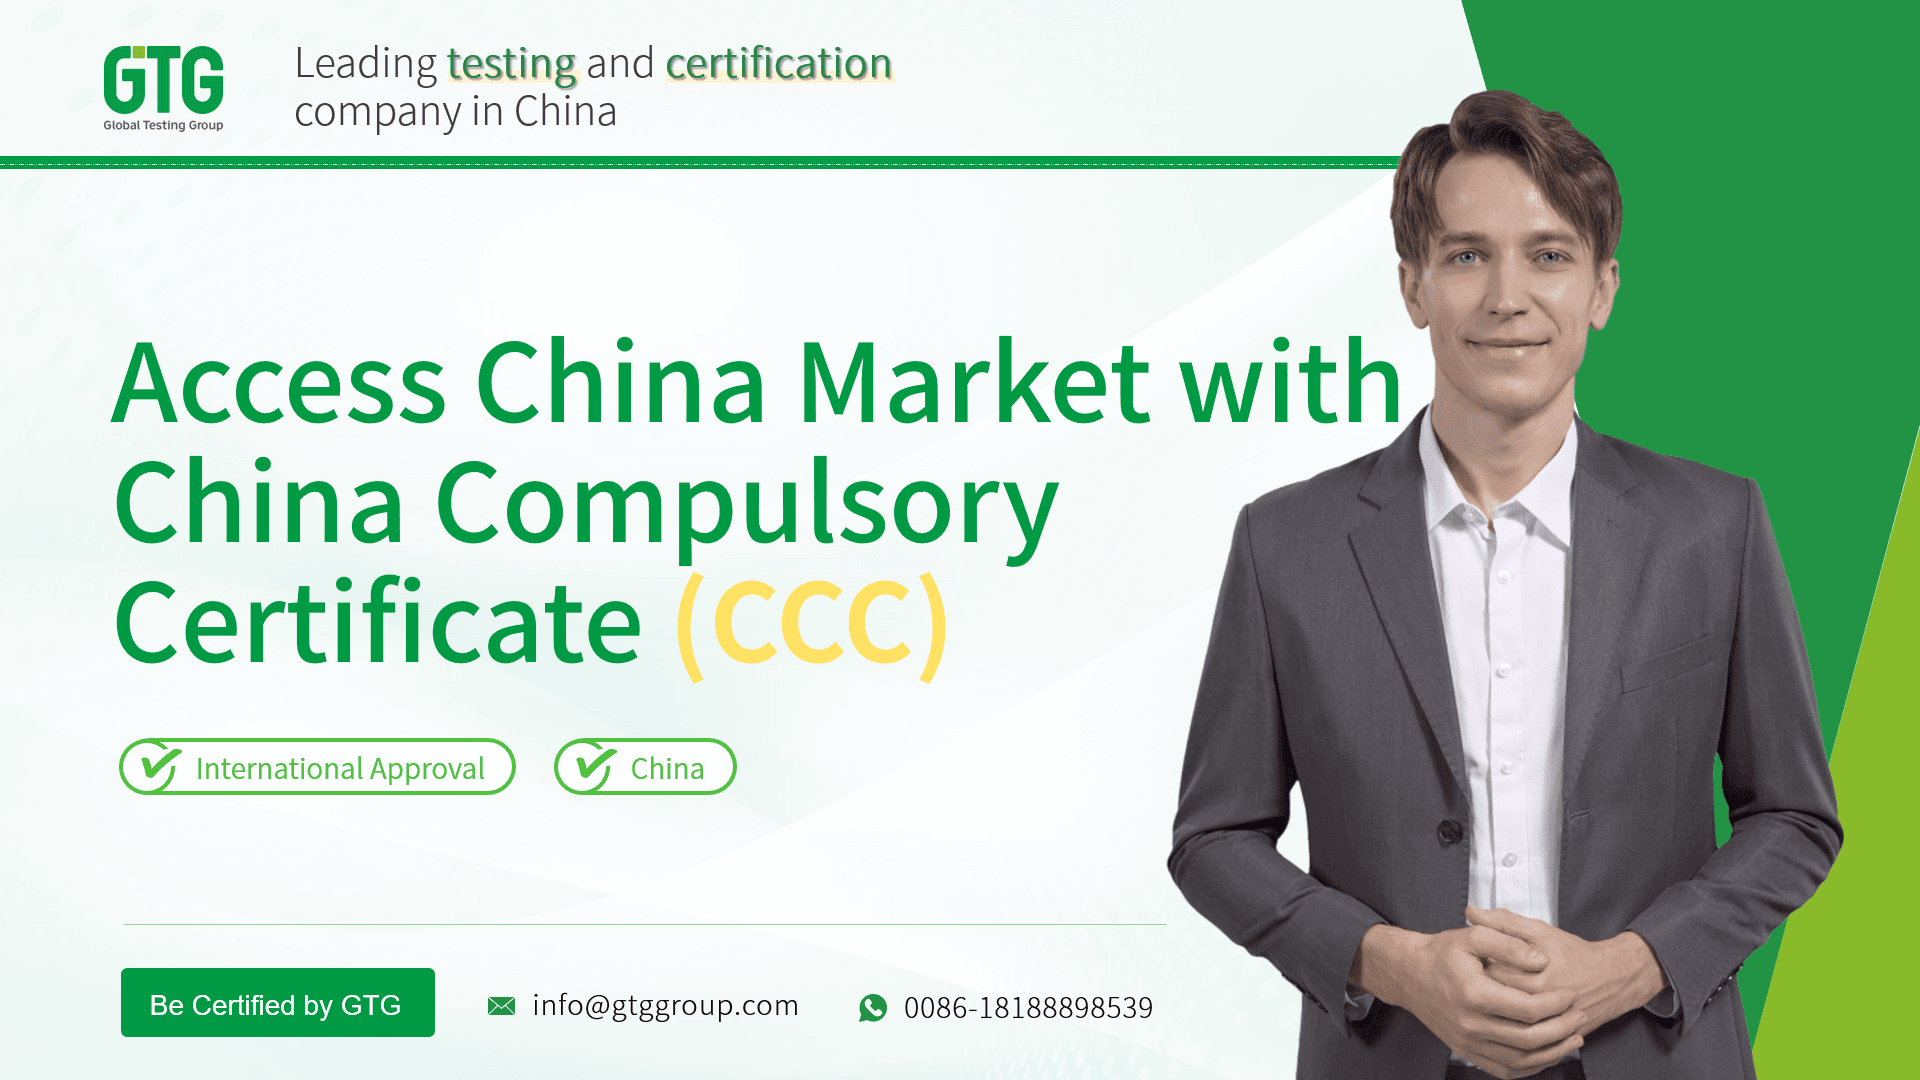 GTG Provides China Compulsory Certificate (CCC) Recognition Service